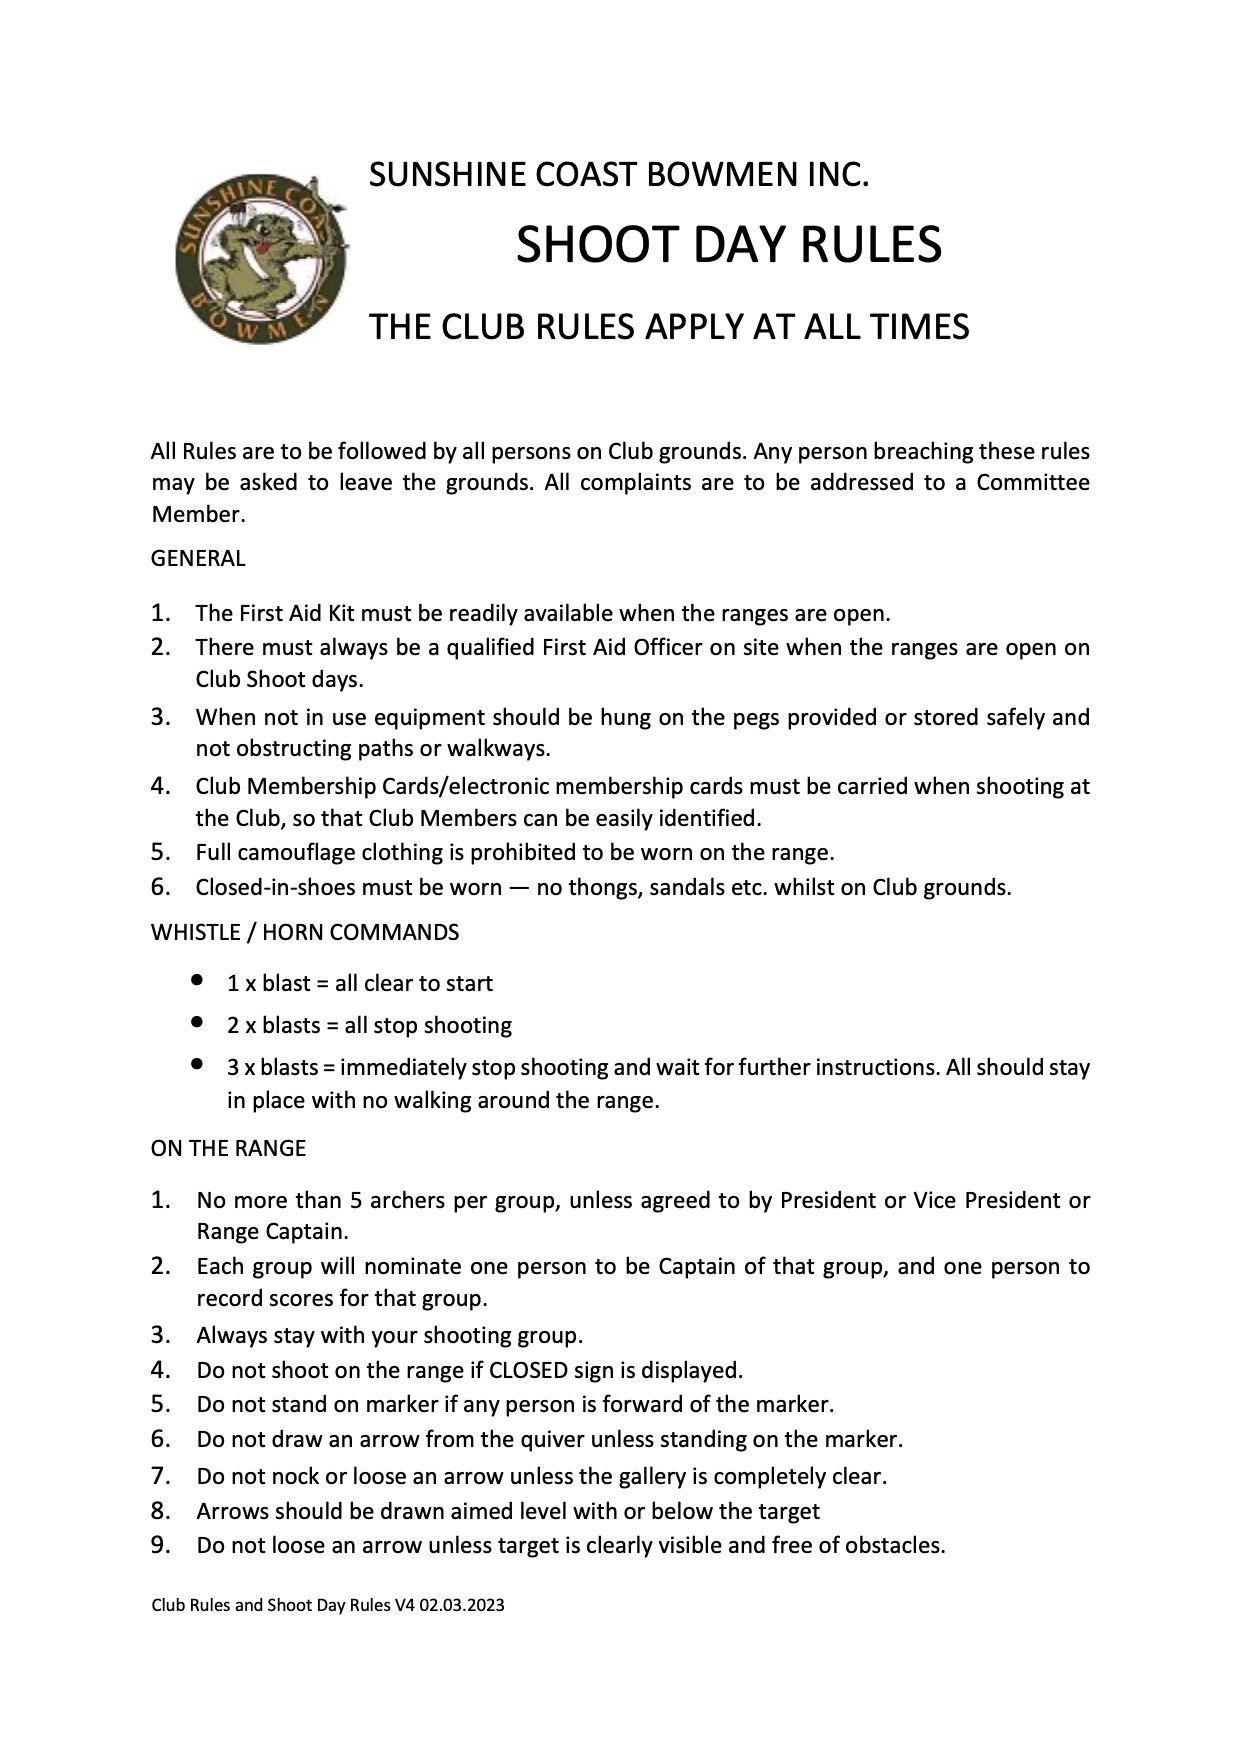 Club-Rules-and-shoot-Day-Rules_V4-02-03.23p3